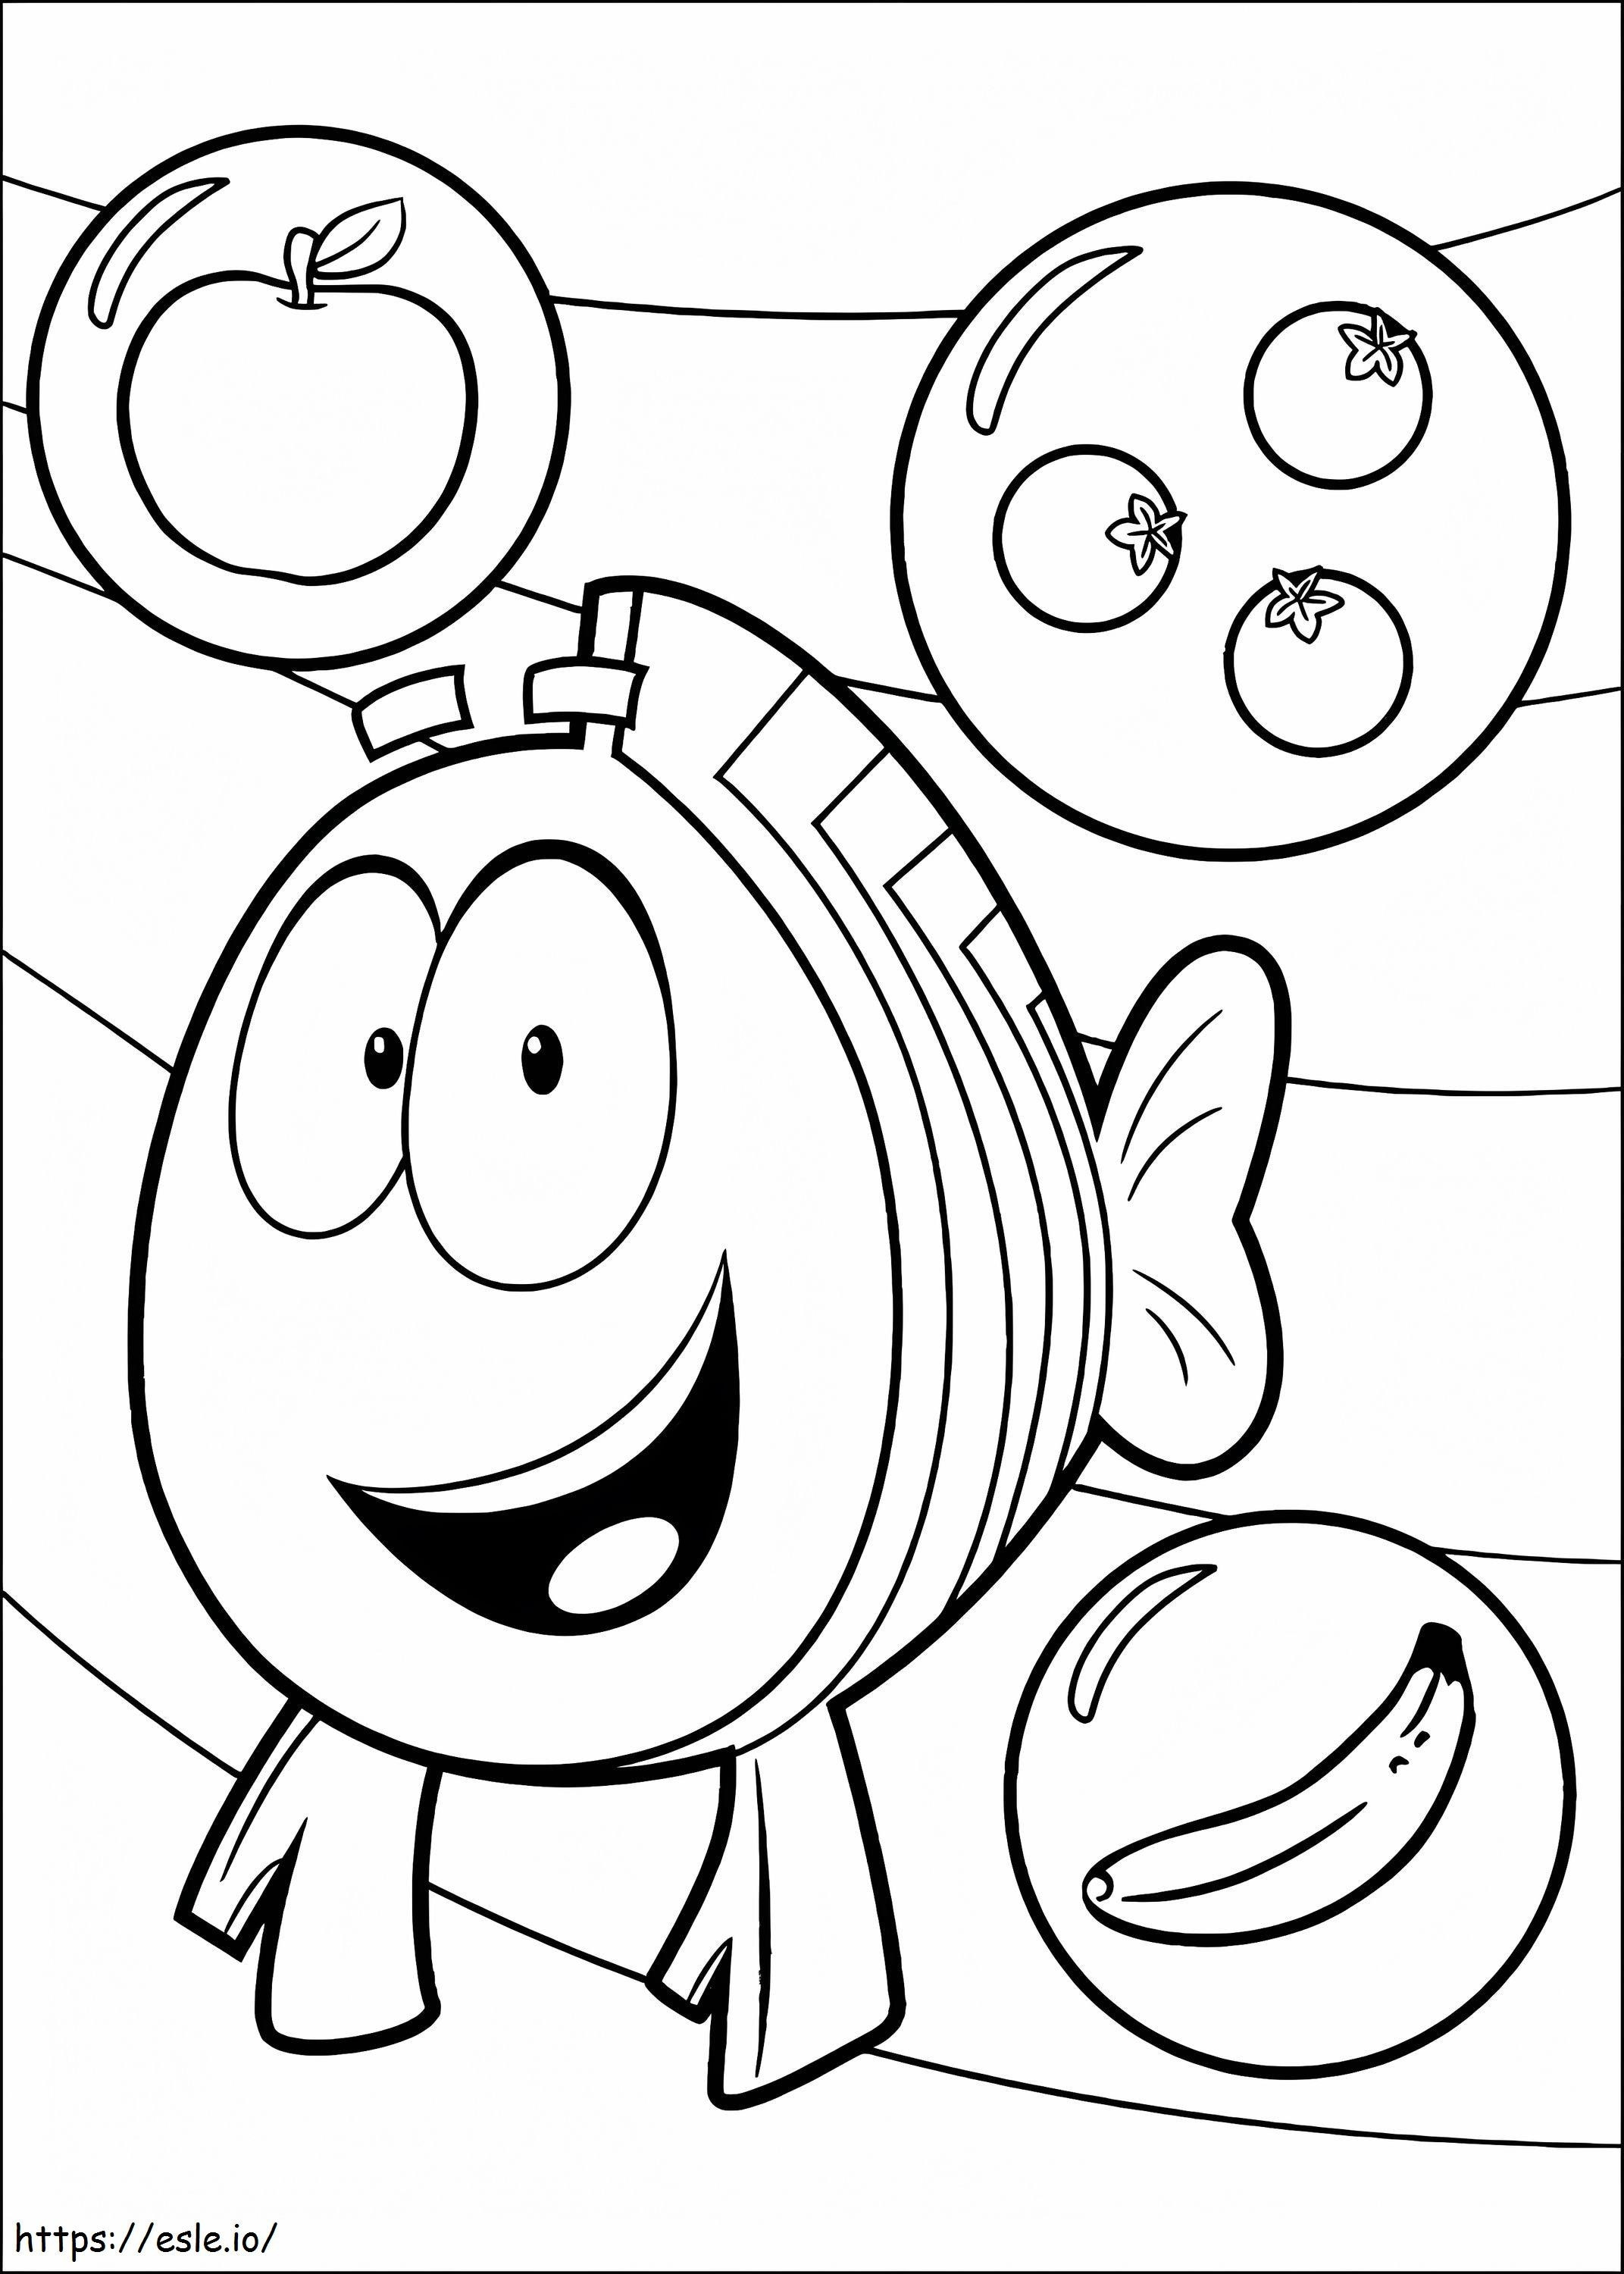 Mr. Grouper And Fruits coloring page